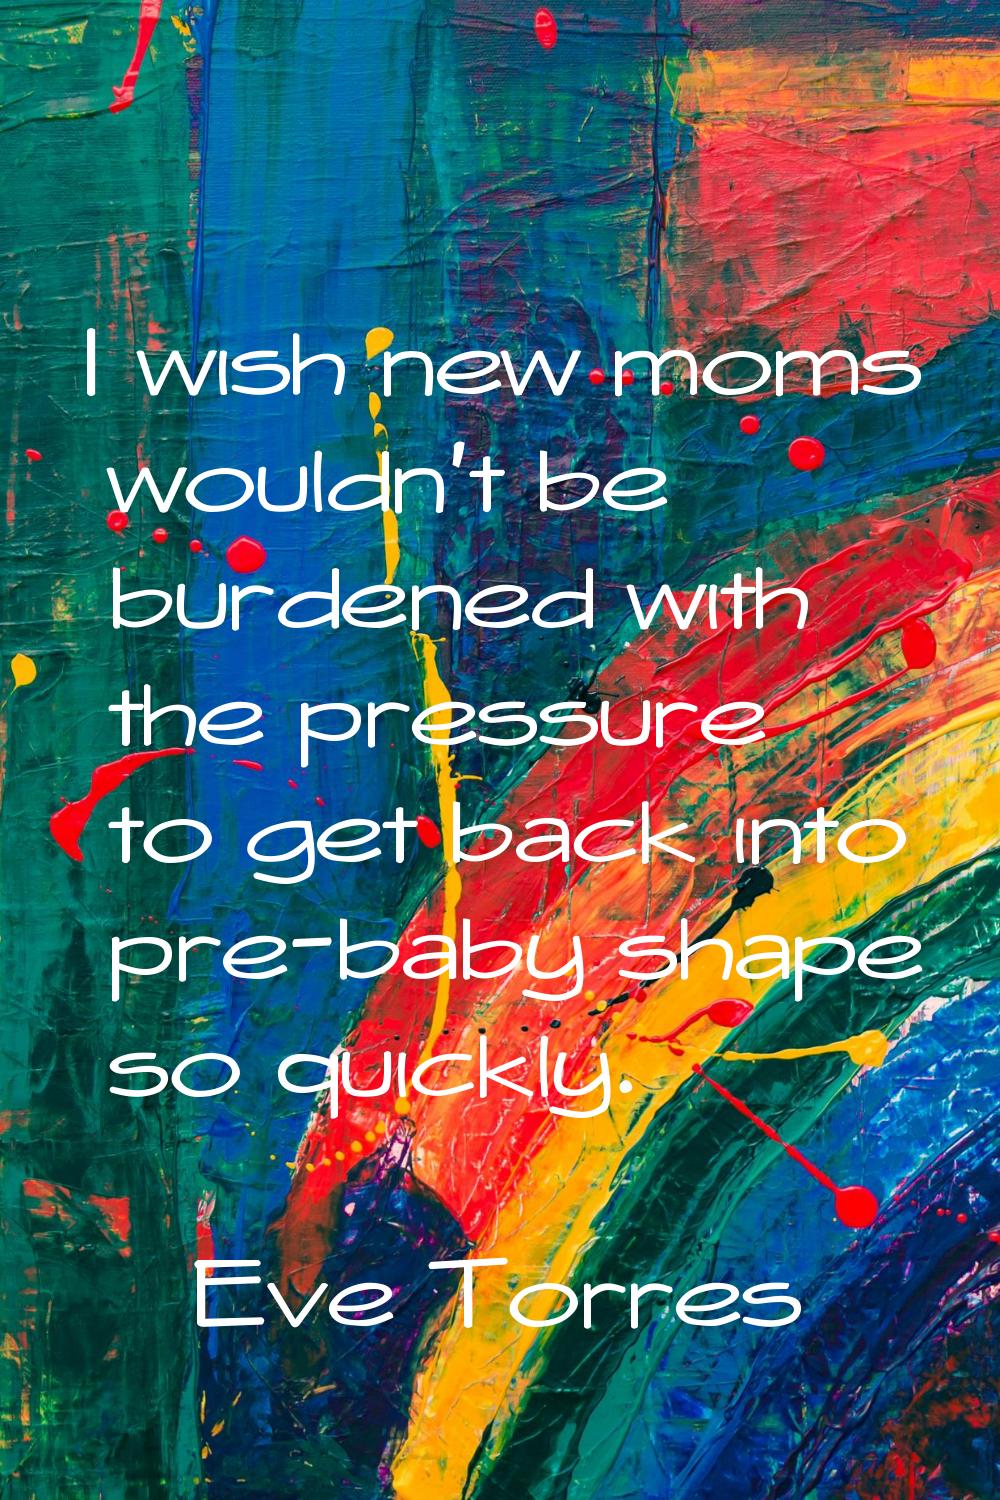 I wish new moms wouldn't be burdened with the pressure to get back into pre-baby shape so quickly.